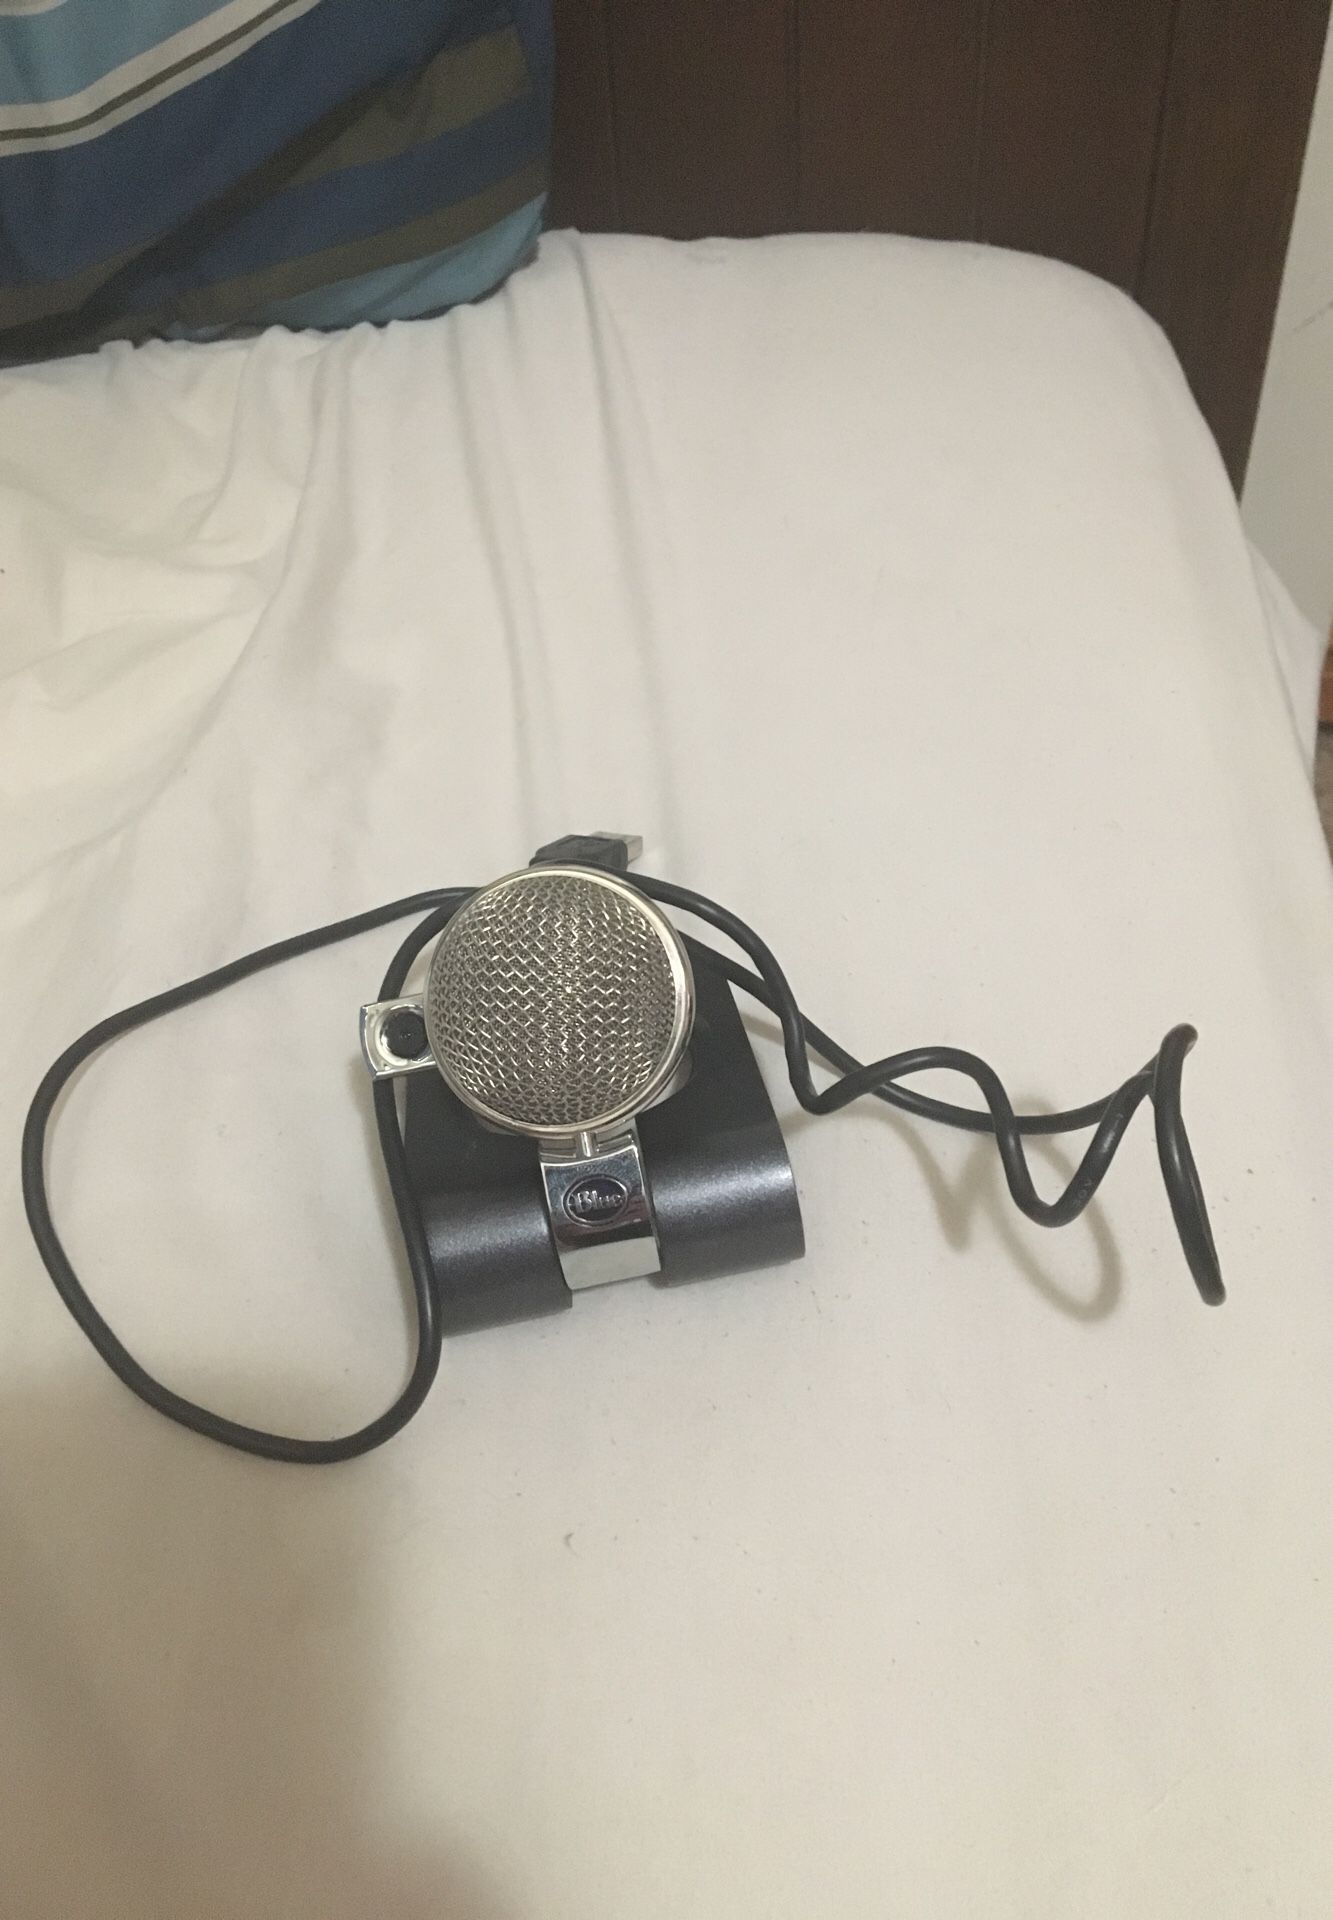 Blue microphone with video camera